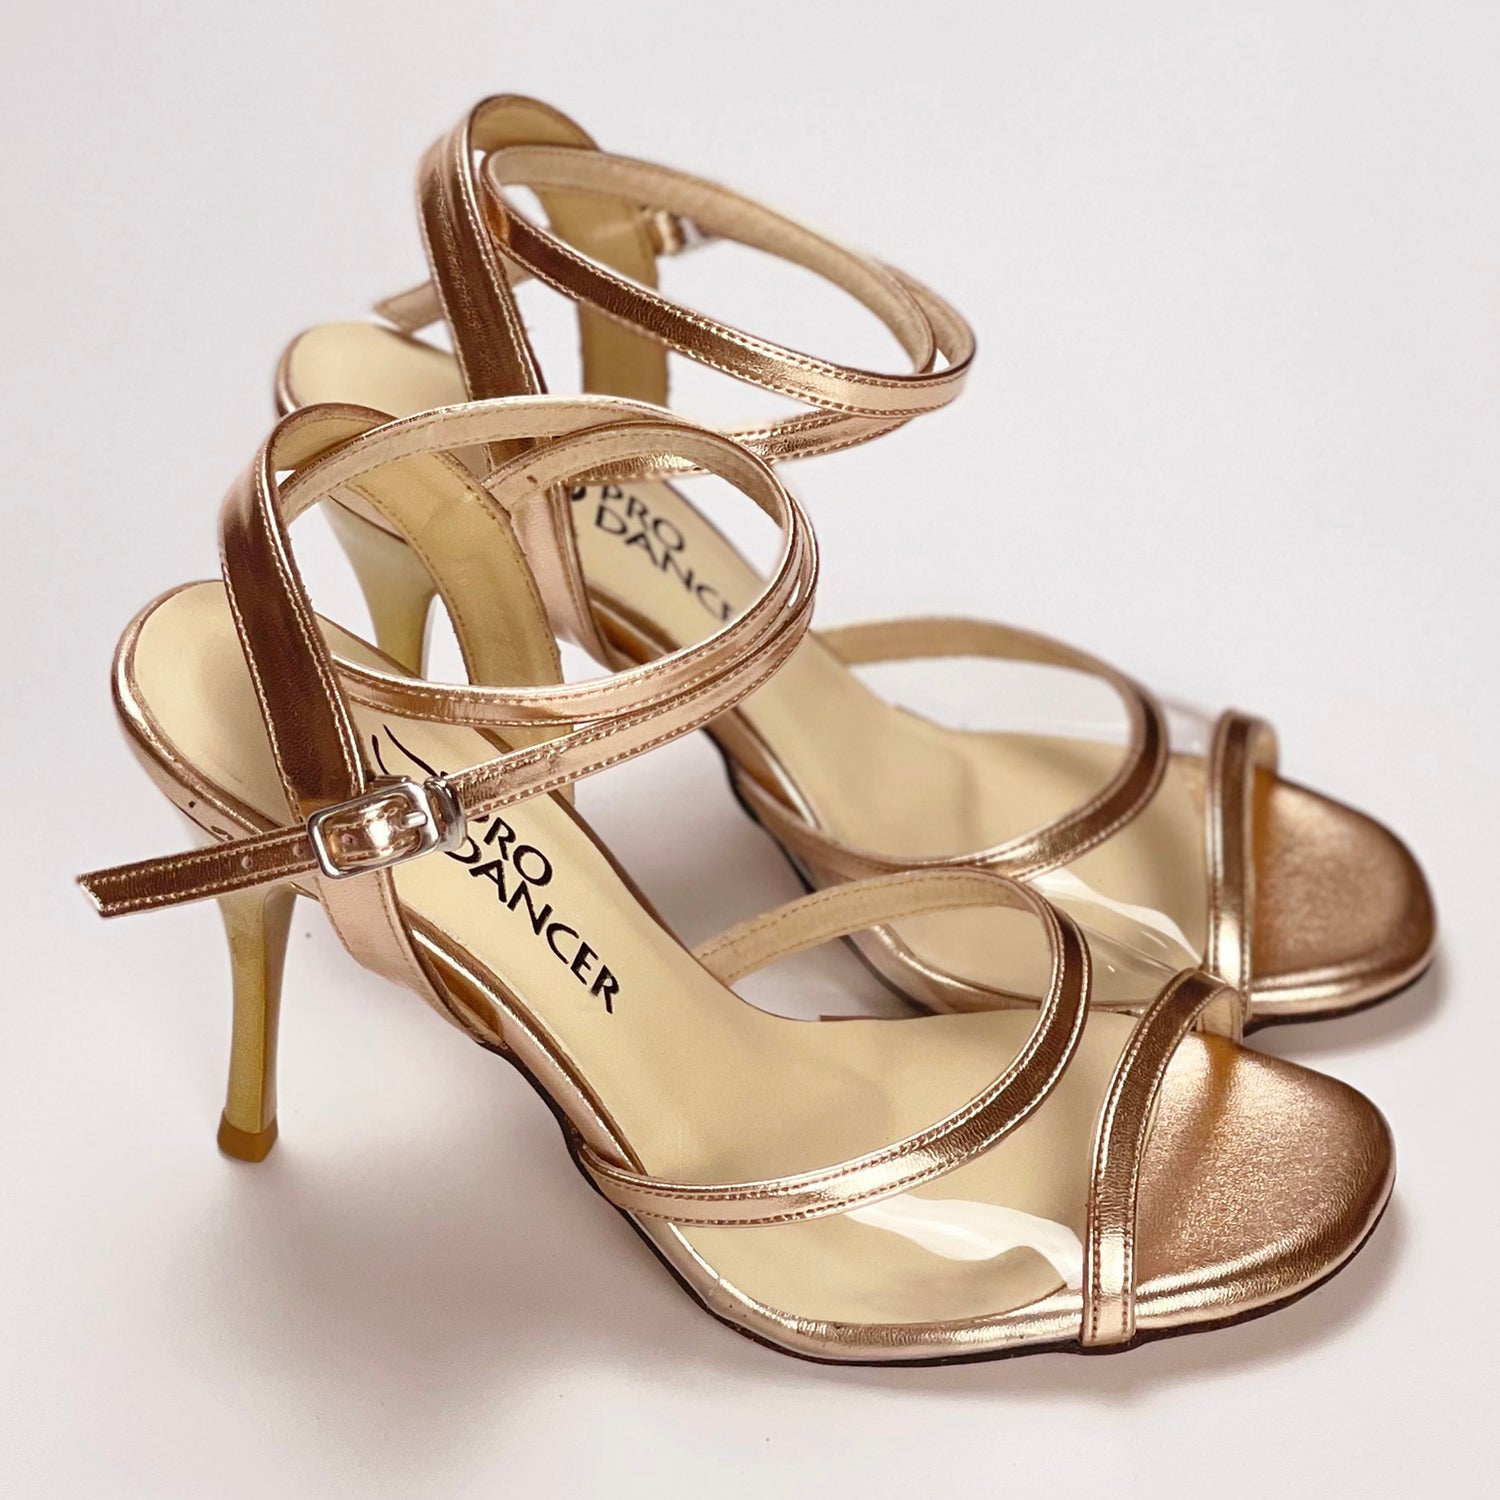 Pro Dancer Tango Argentino high heel dance sandals with leather sole in rose gold (PD-9062A)1